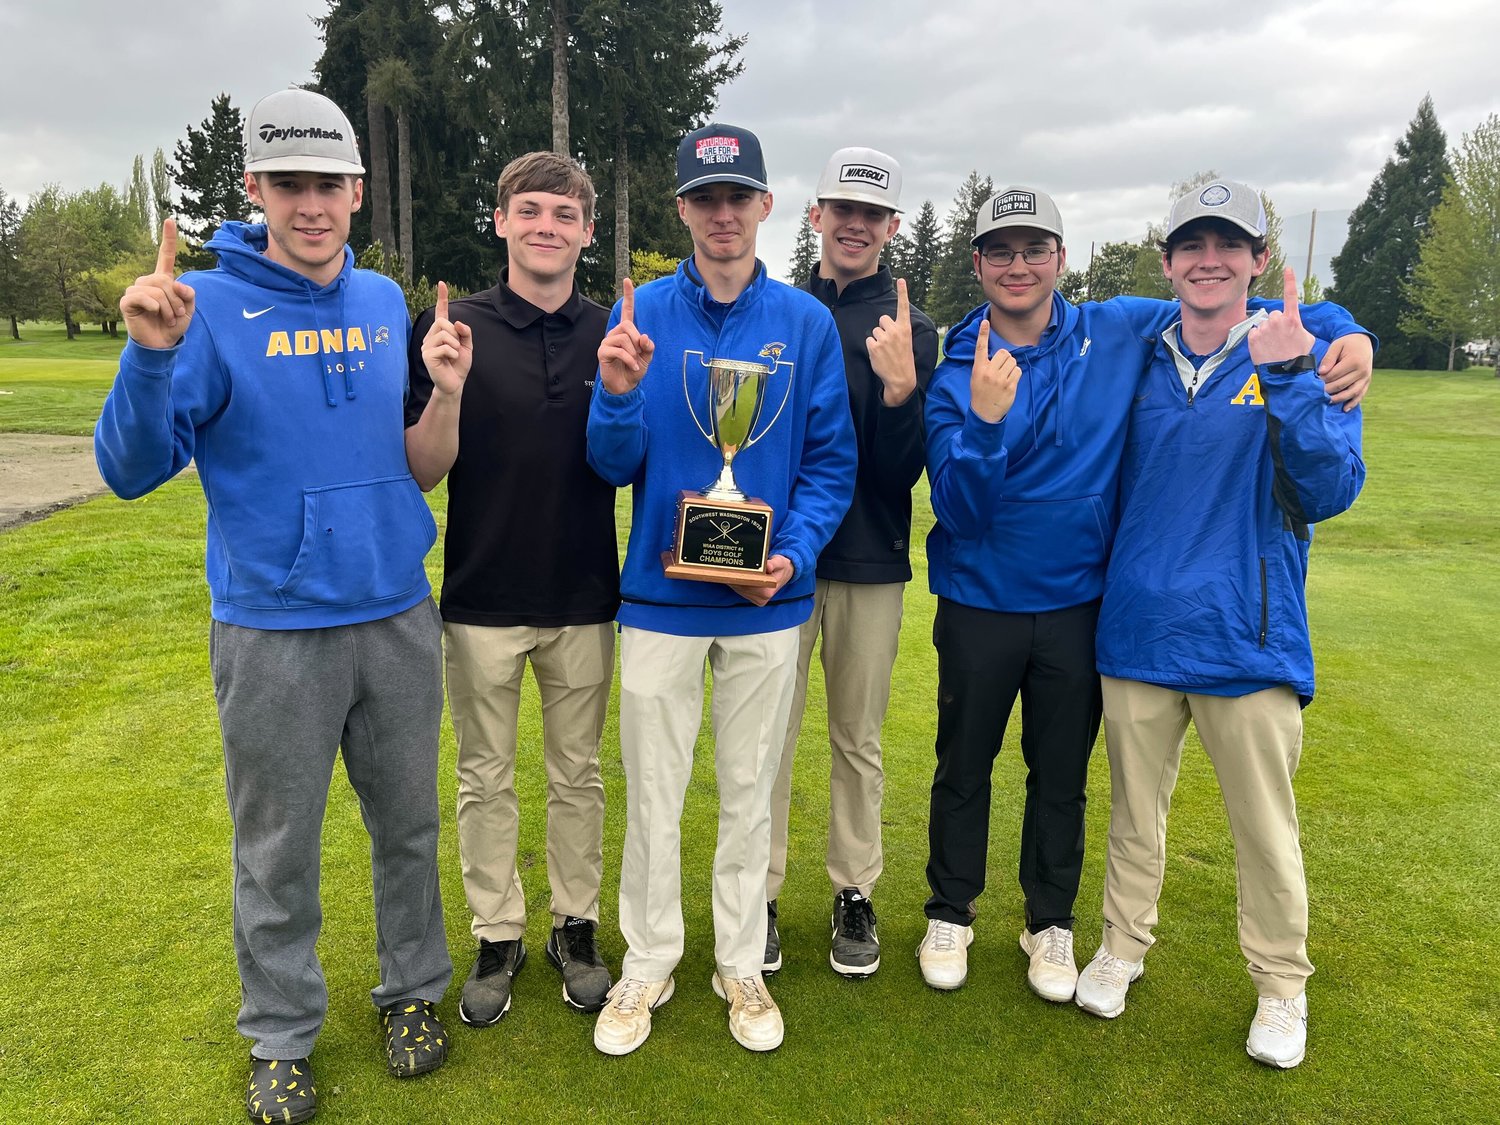 The Adna boys golf team poses with the district championship trophy after winning a team title at the 2B District 4 golf tournament May 18.